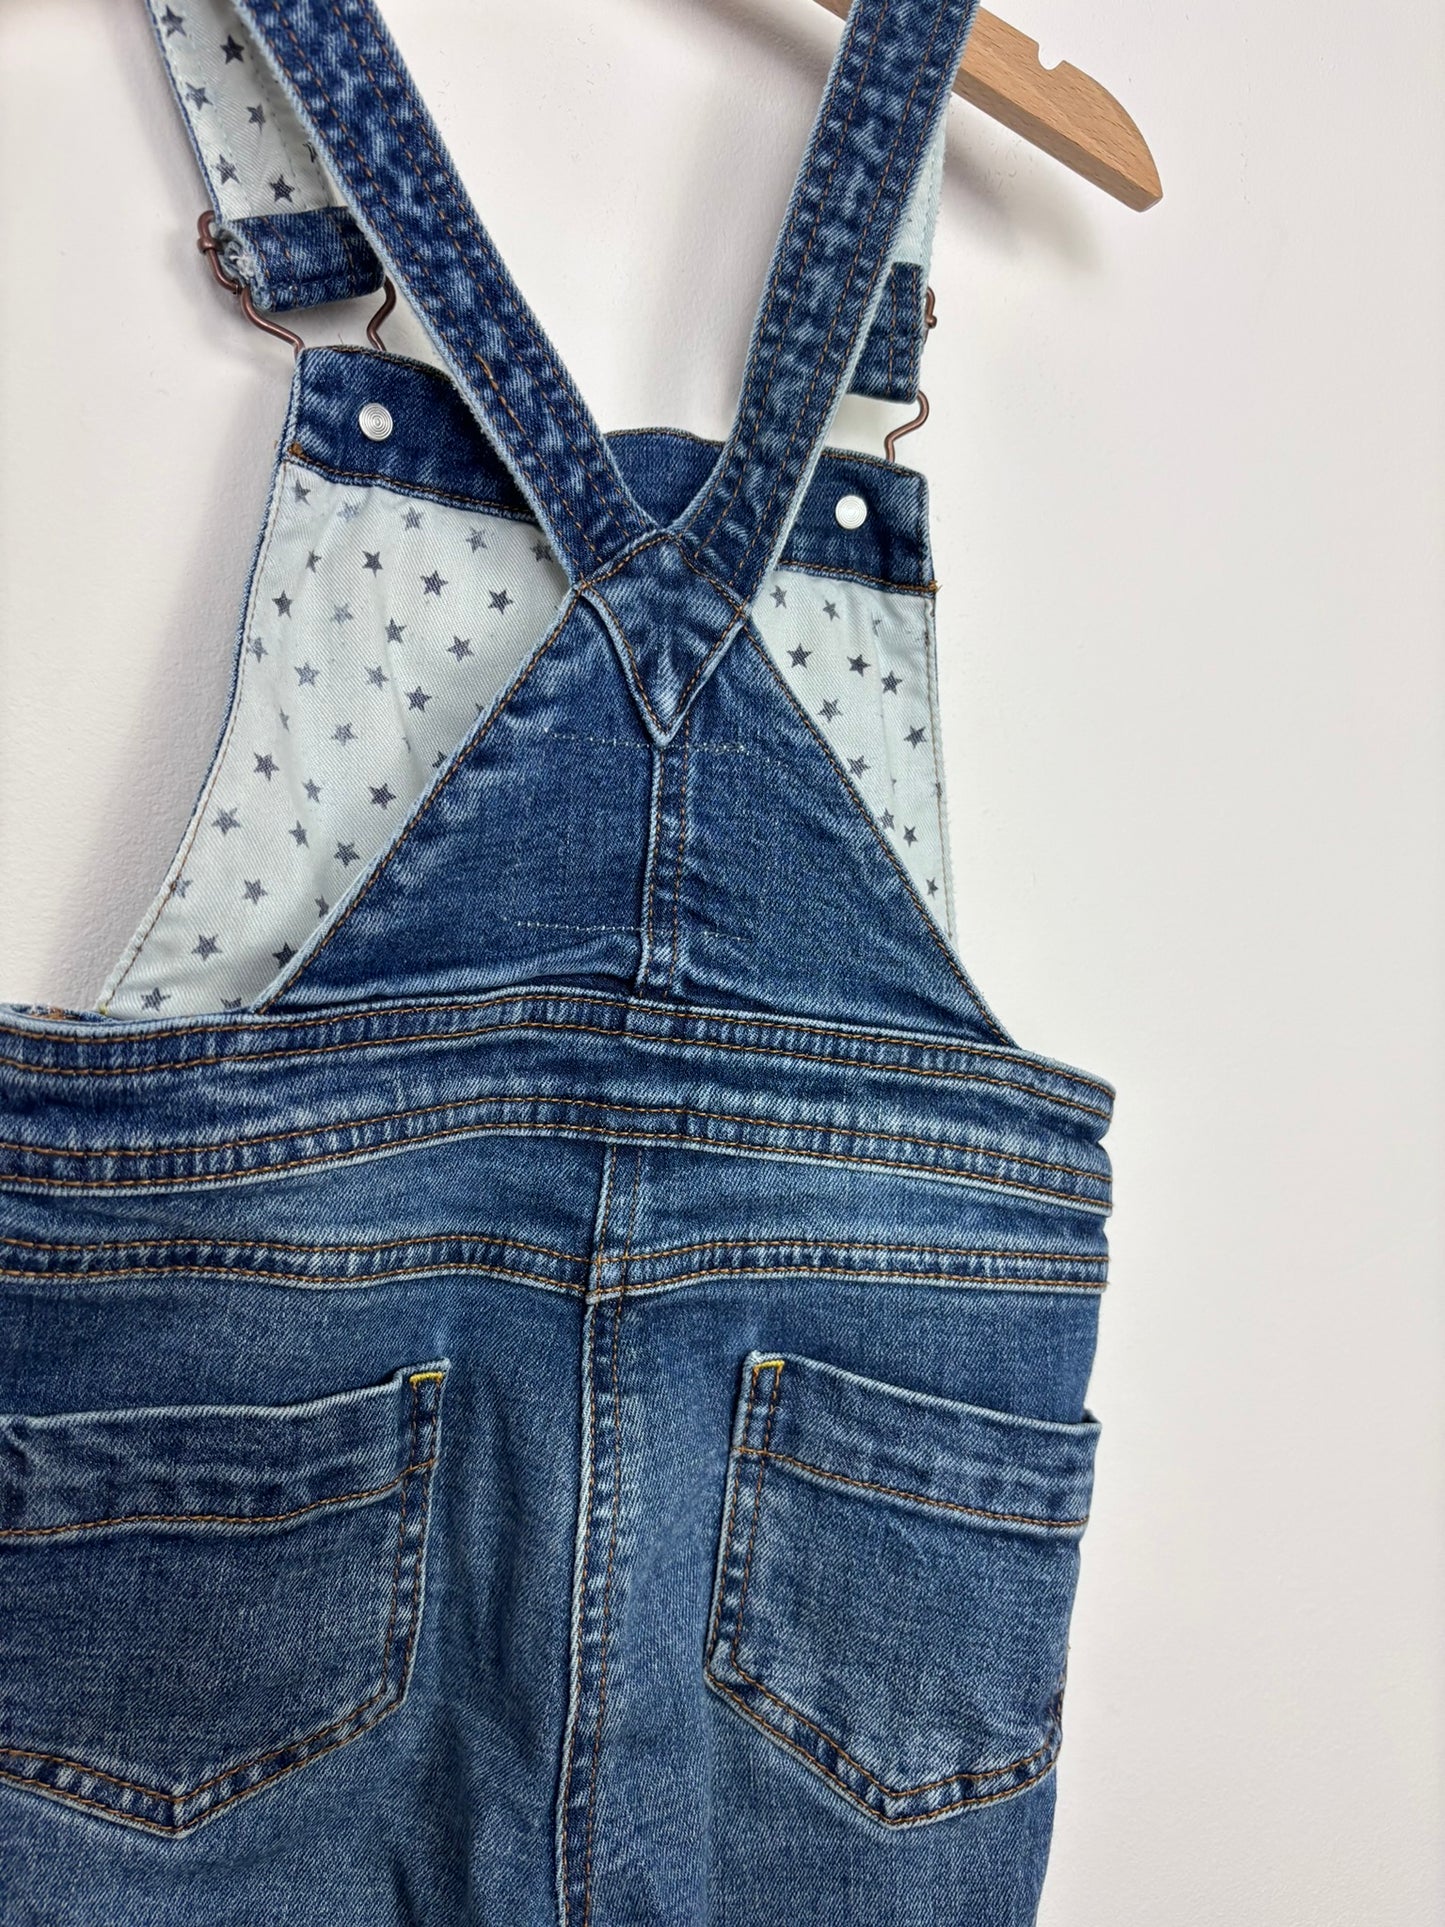 Boden 4-5 Years-Dungarees-Second Snuggle Preloved